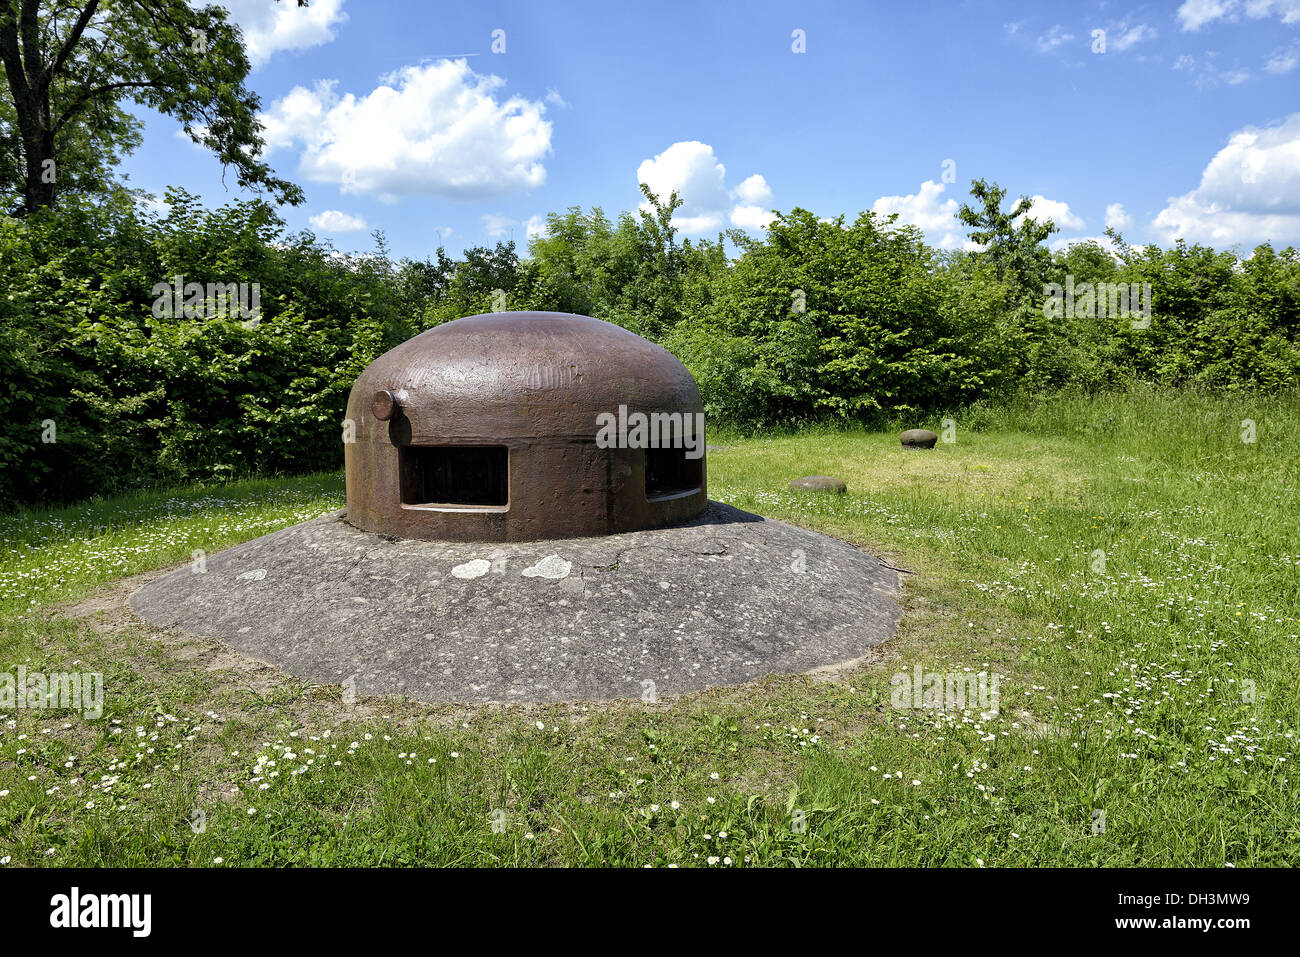 Armored cloche, Hackenberg fortress, Maginot line. Stock Photo